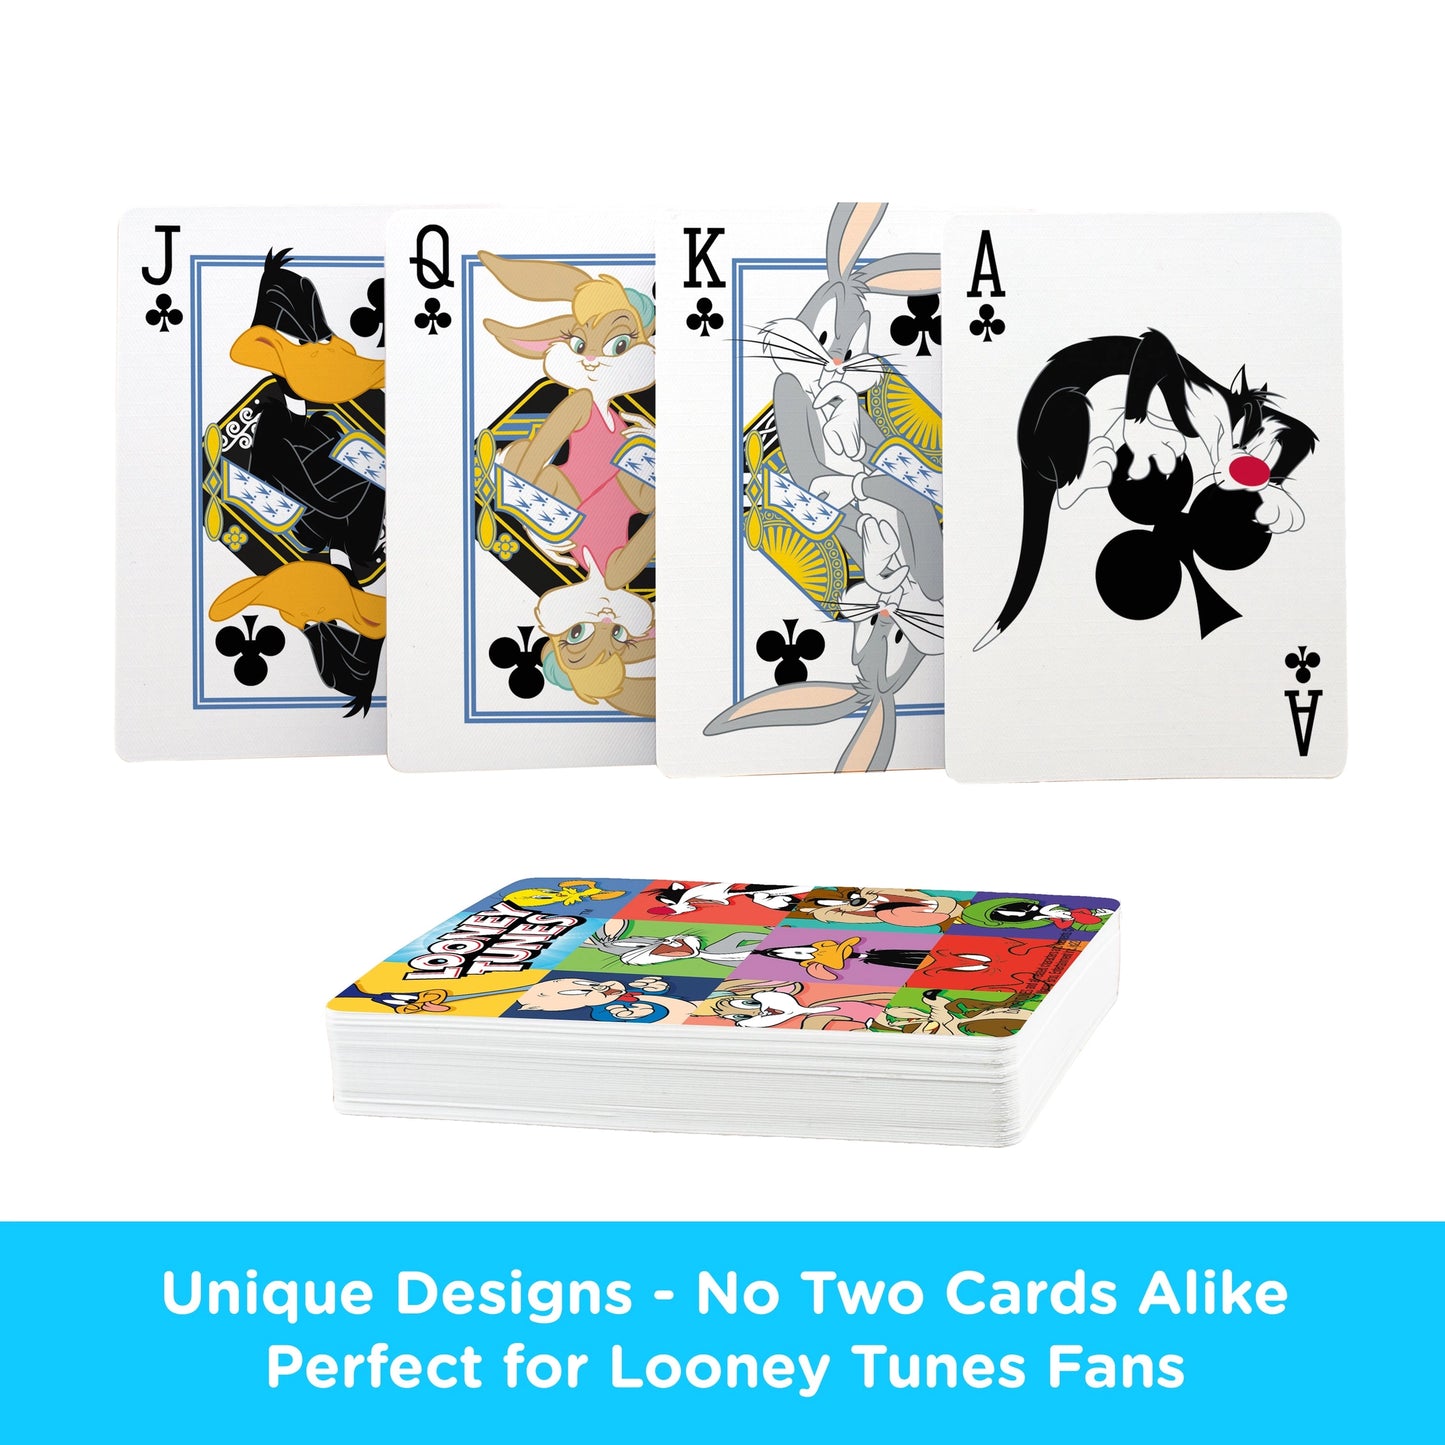 Looney Tunes Playing Cards - Tune Take Over!